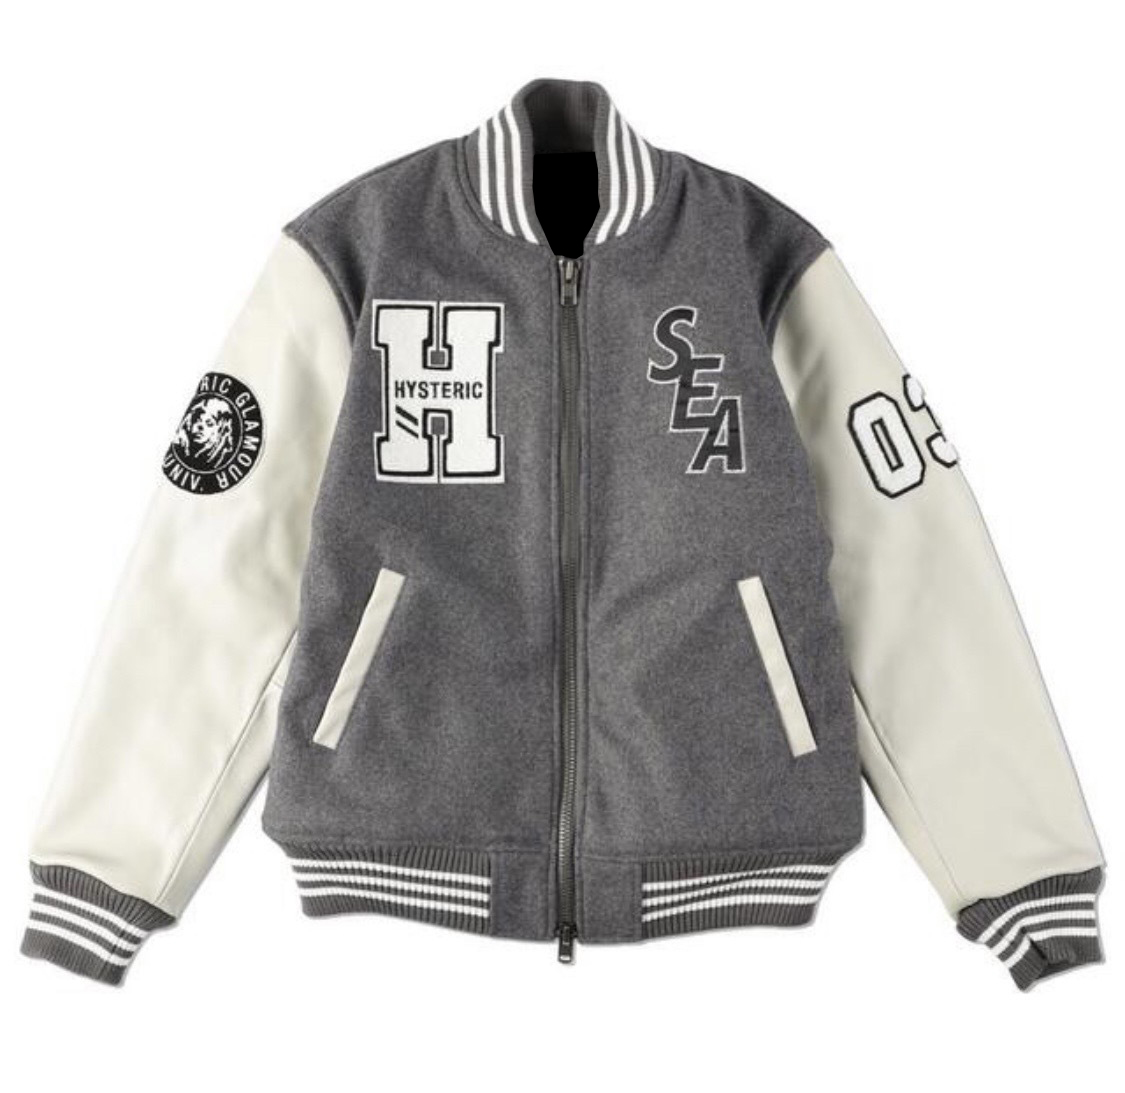 Hysteric Glamour Grey Wind And Sea Varsity Jacket